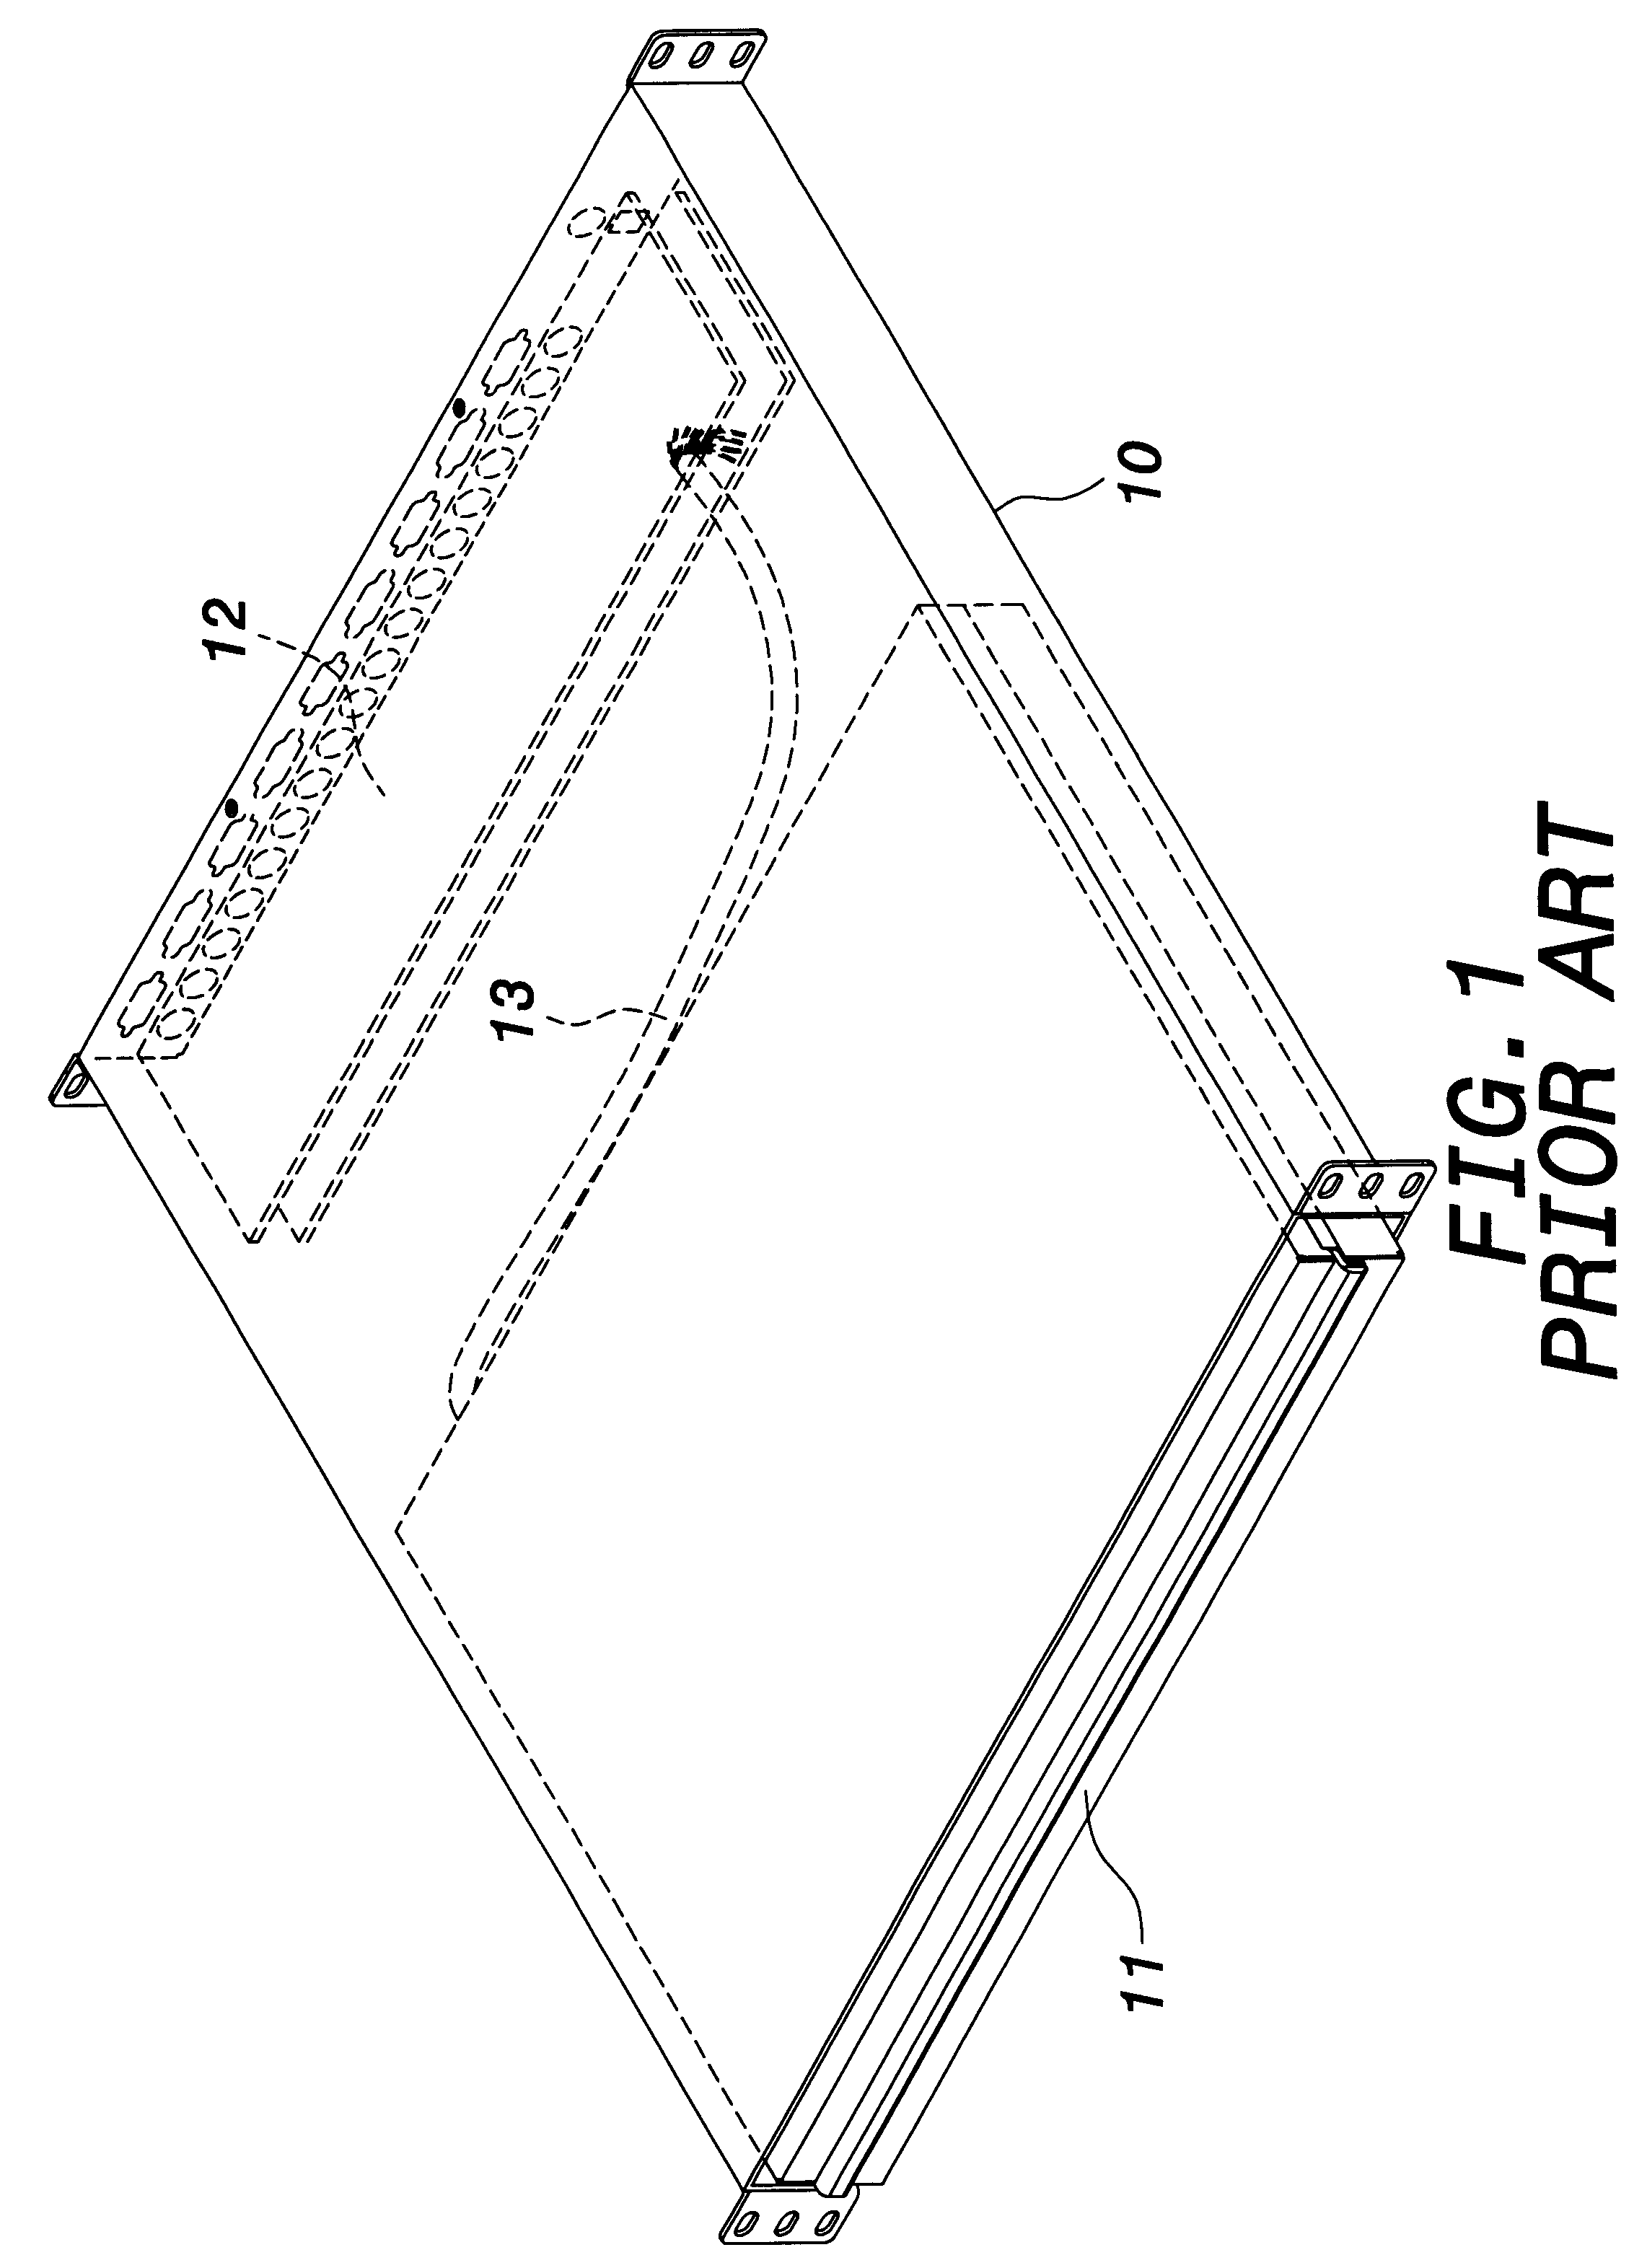 Retaining structure for industrial console